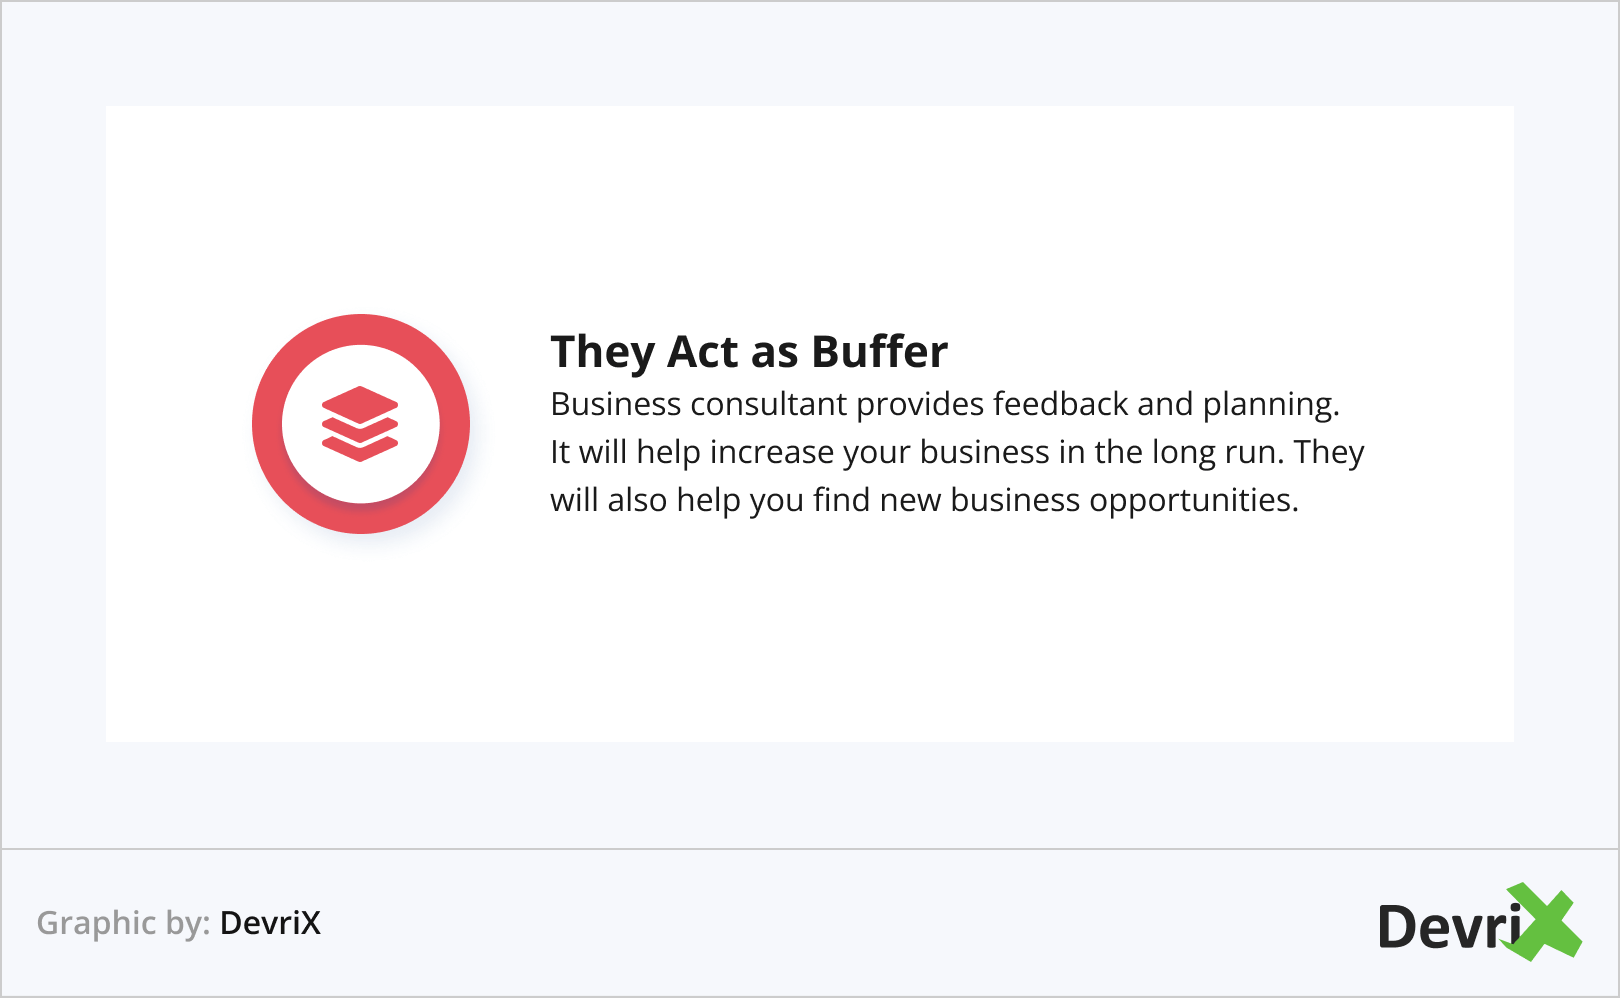 They Act as Buffer